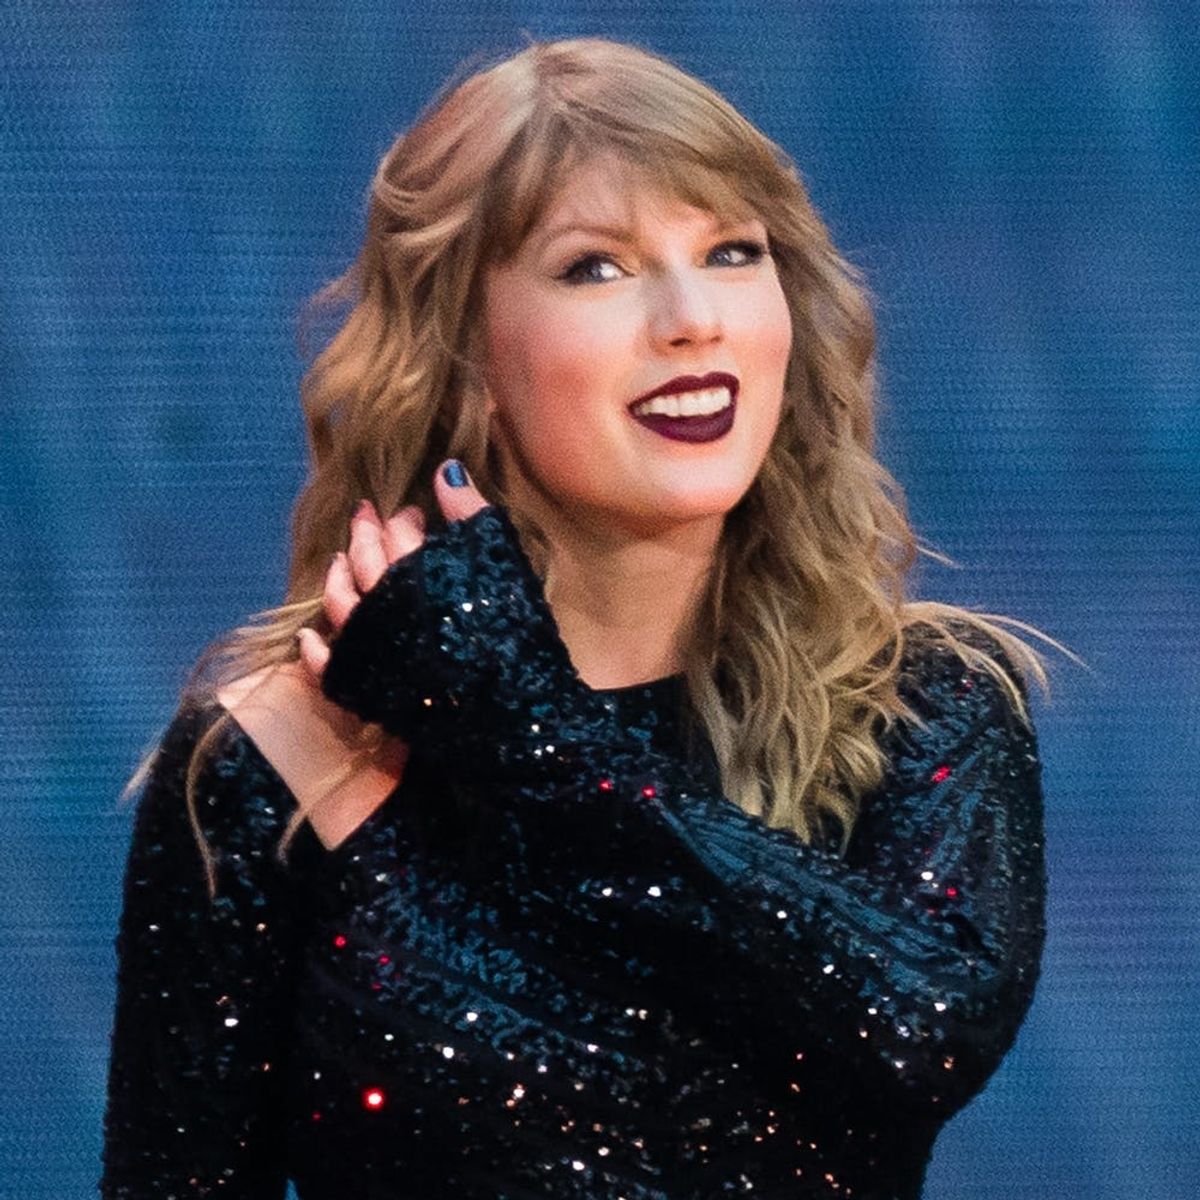 Taylor Swift Will Star in the Movie Adaptation of the Famous ‘Cats’ Musical